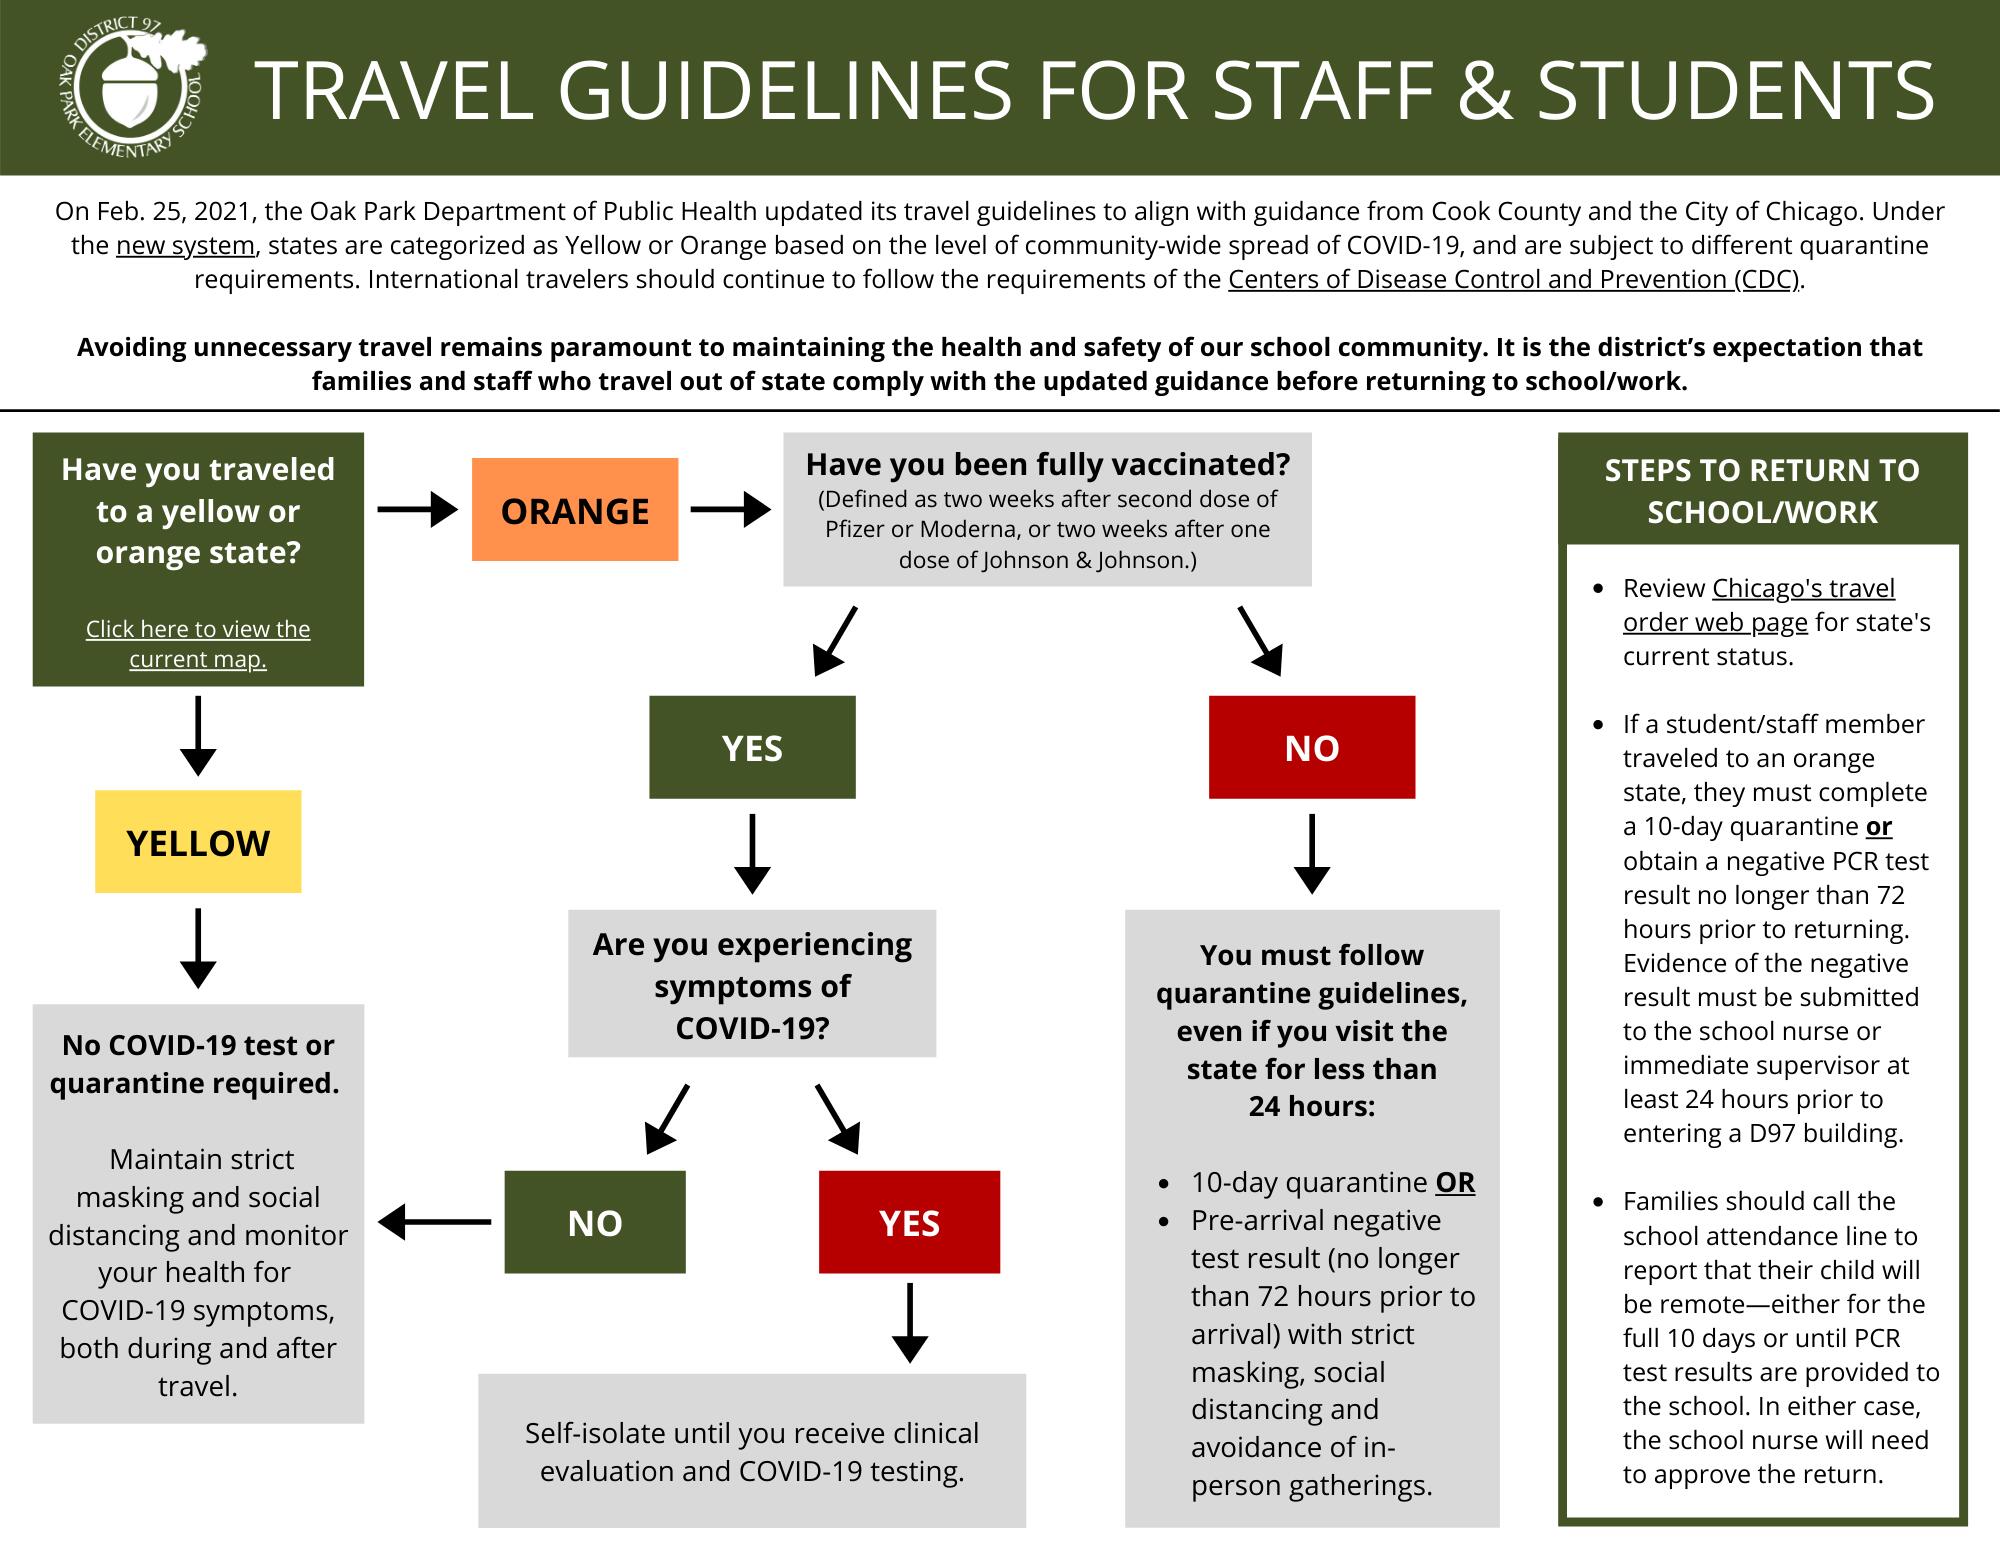 Travel Guidance for D97 Students and Staff (click to view PDF)